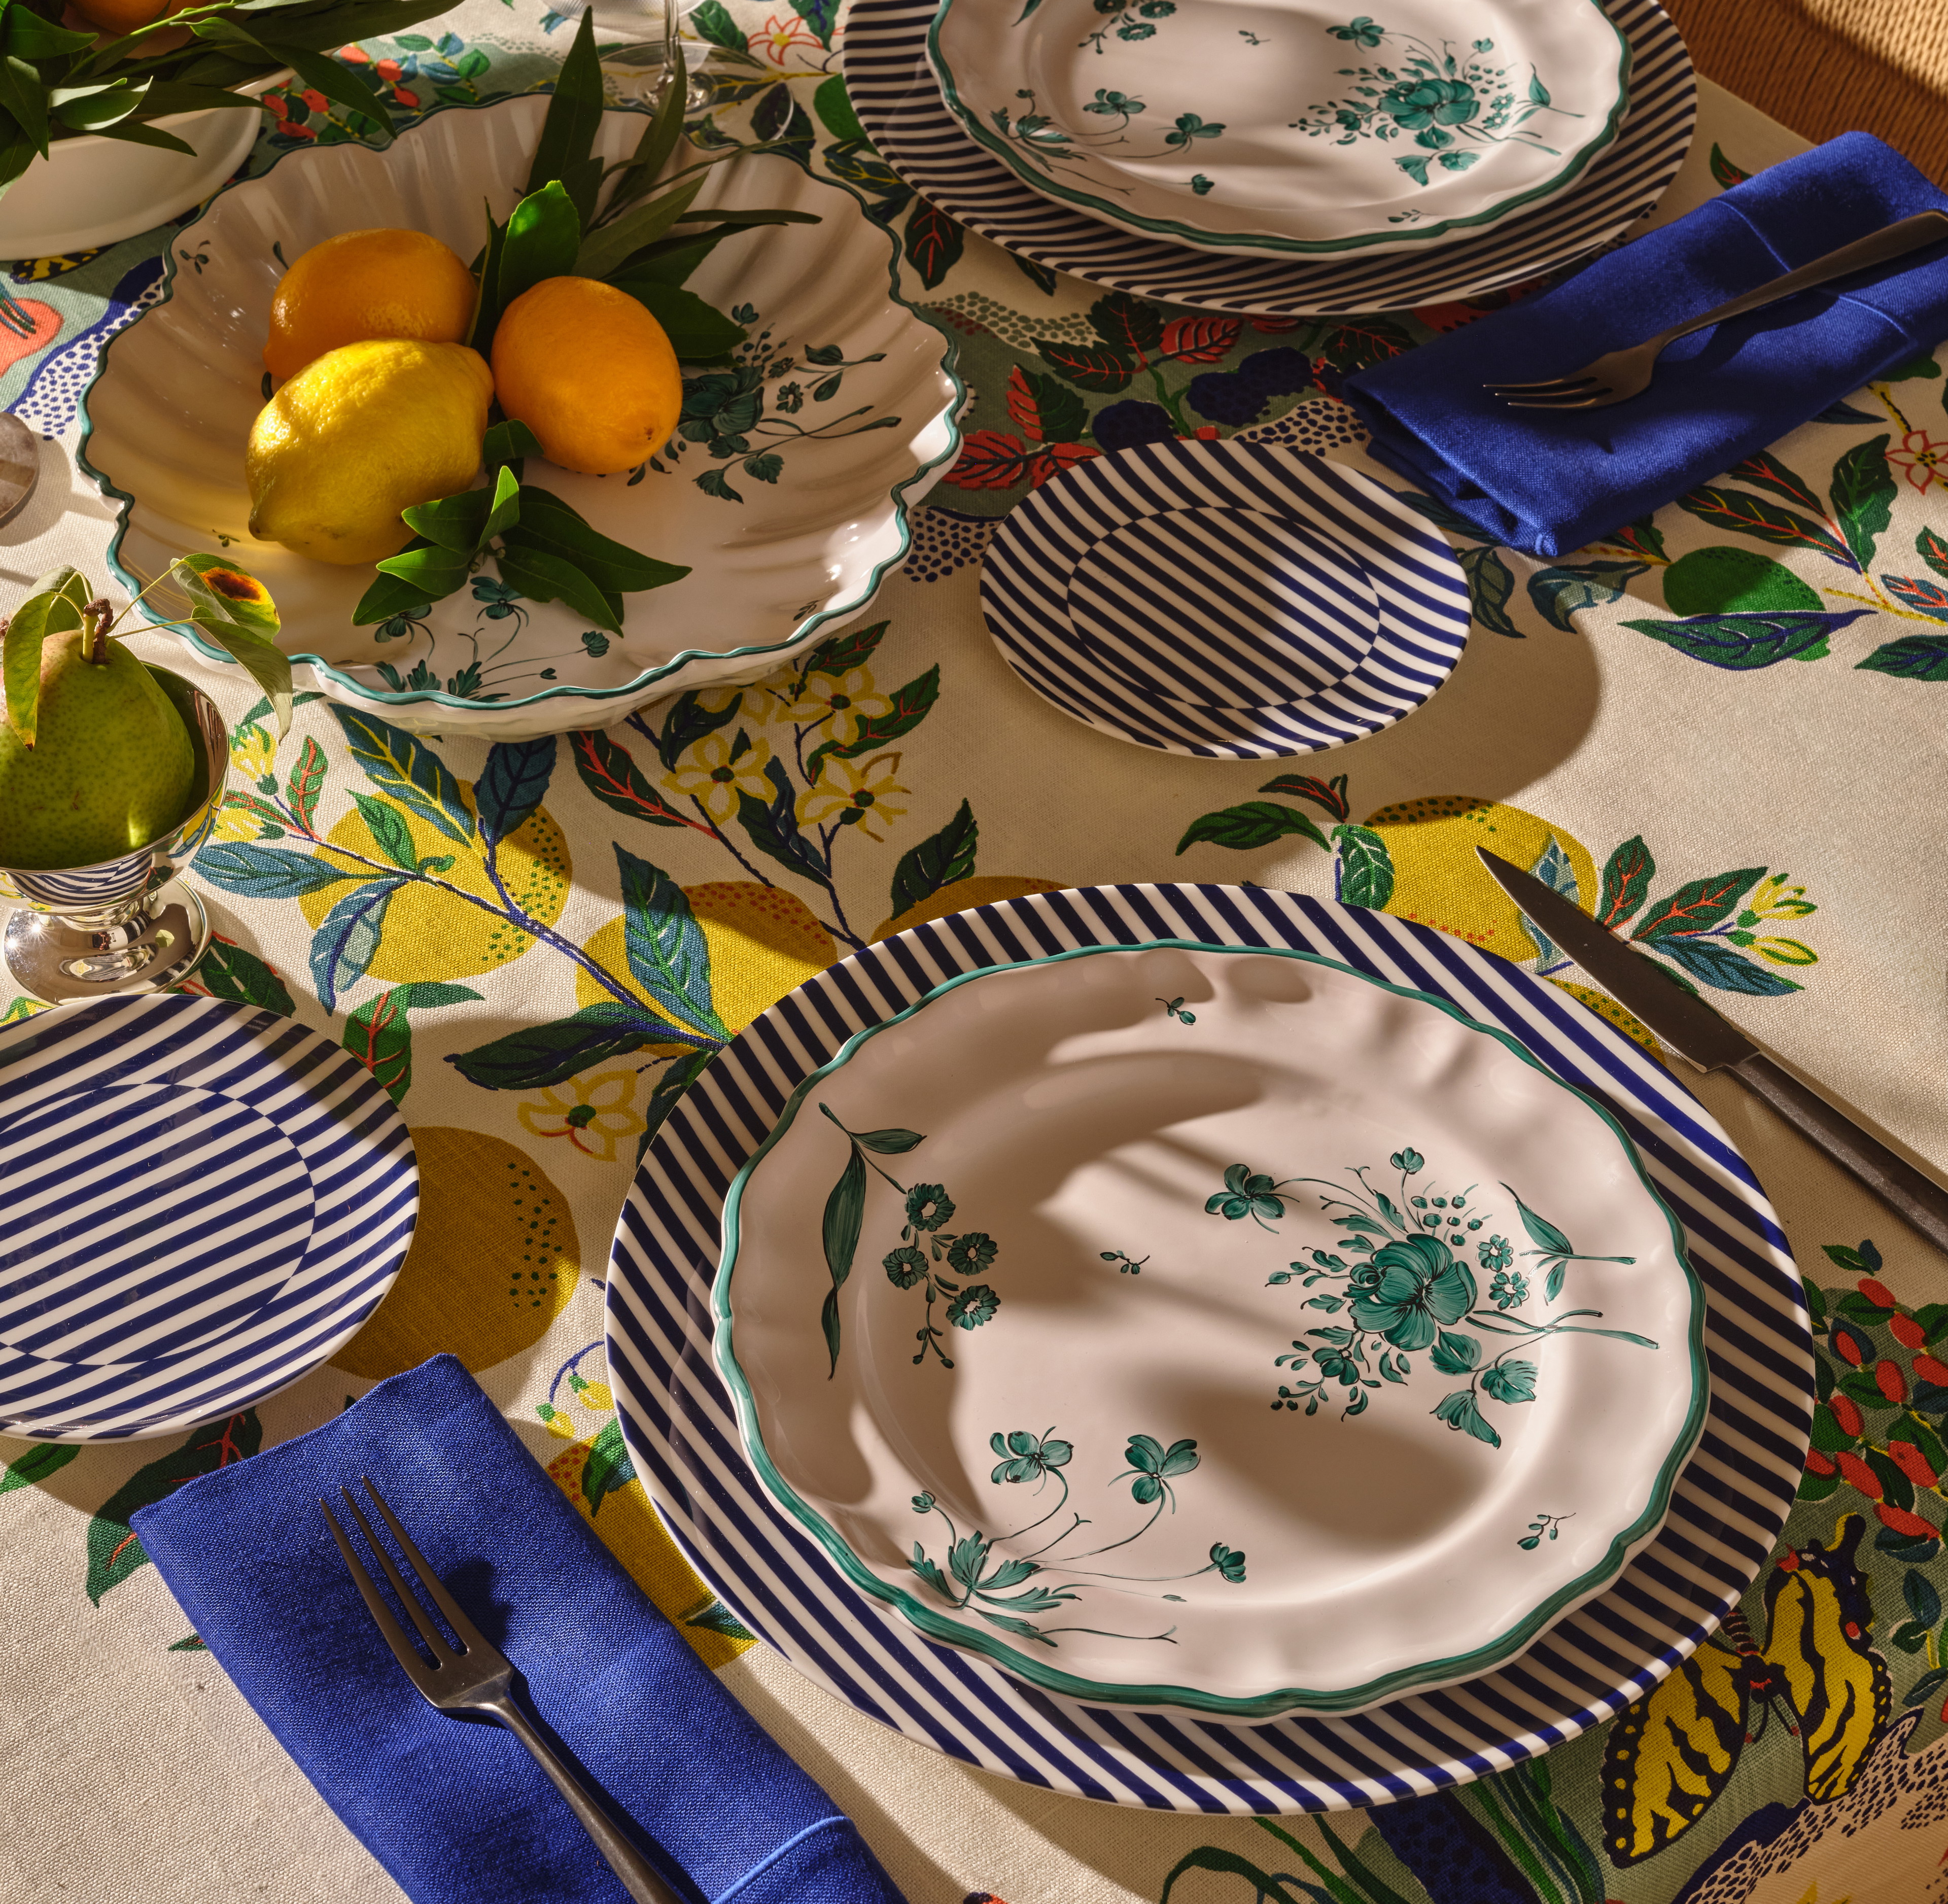 a table topped with plates and bowls filled with fruit